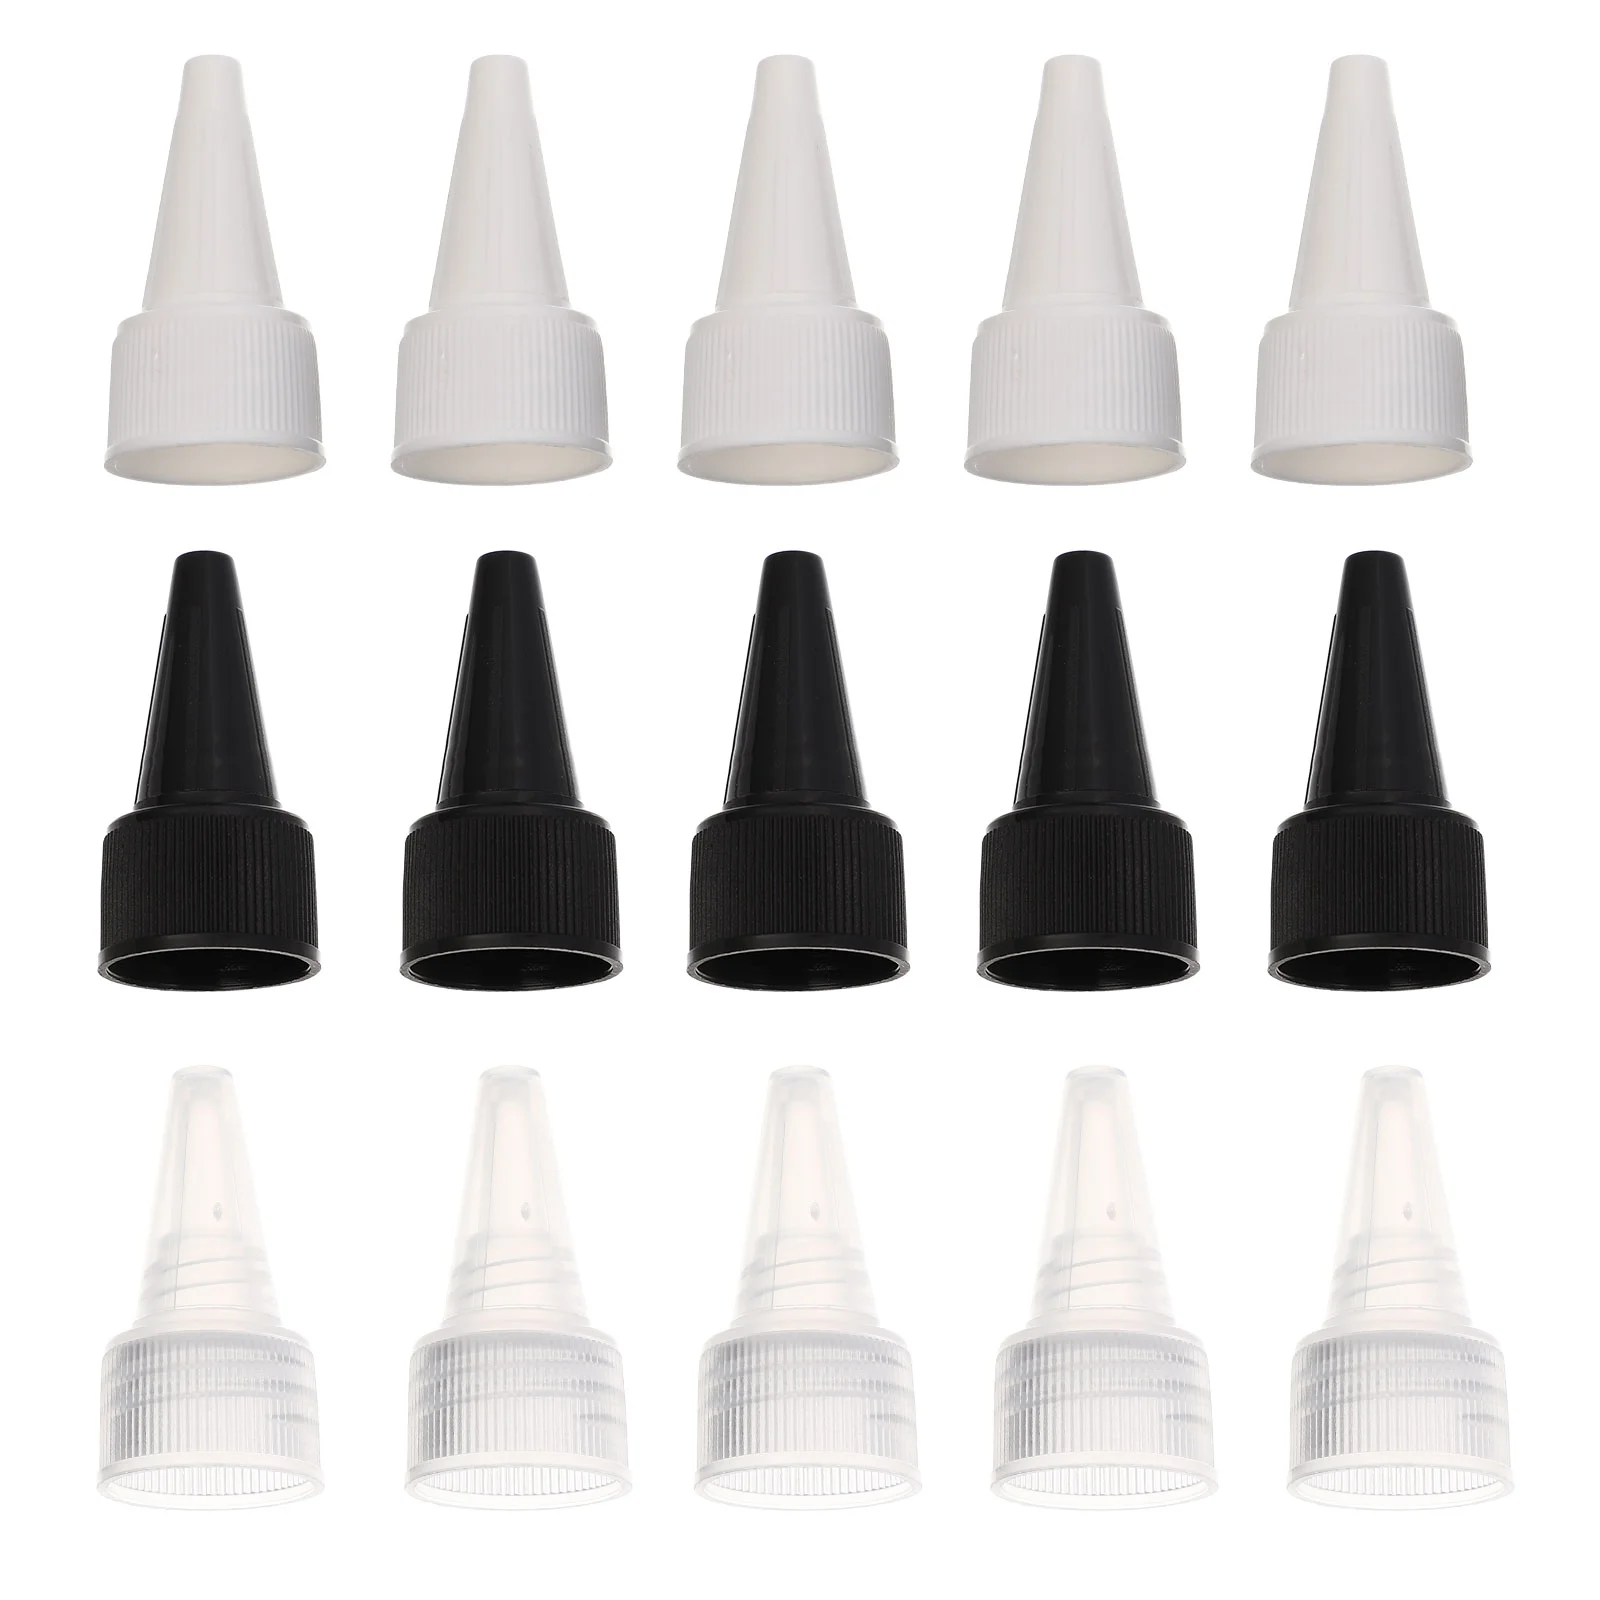 

Bottle Glue Squeeze Applicator Cap Caps Mouth Pointed Lid Lids Tip Liquid Tips Needledispensing Sealing Squirtreplacement Hair